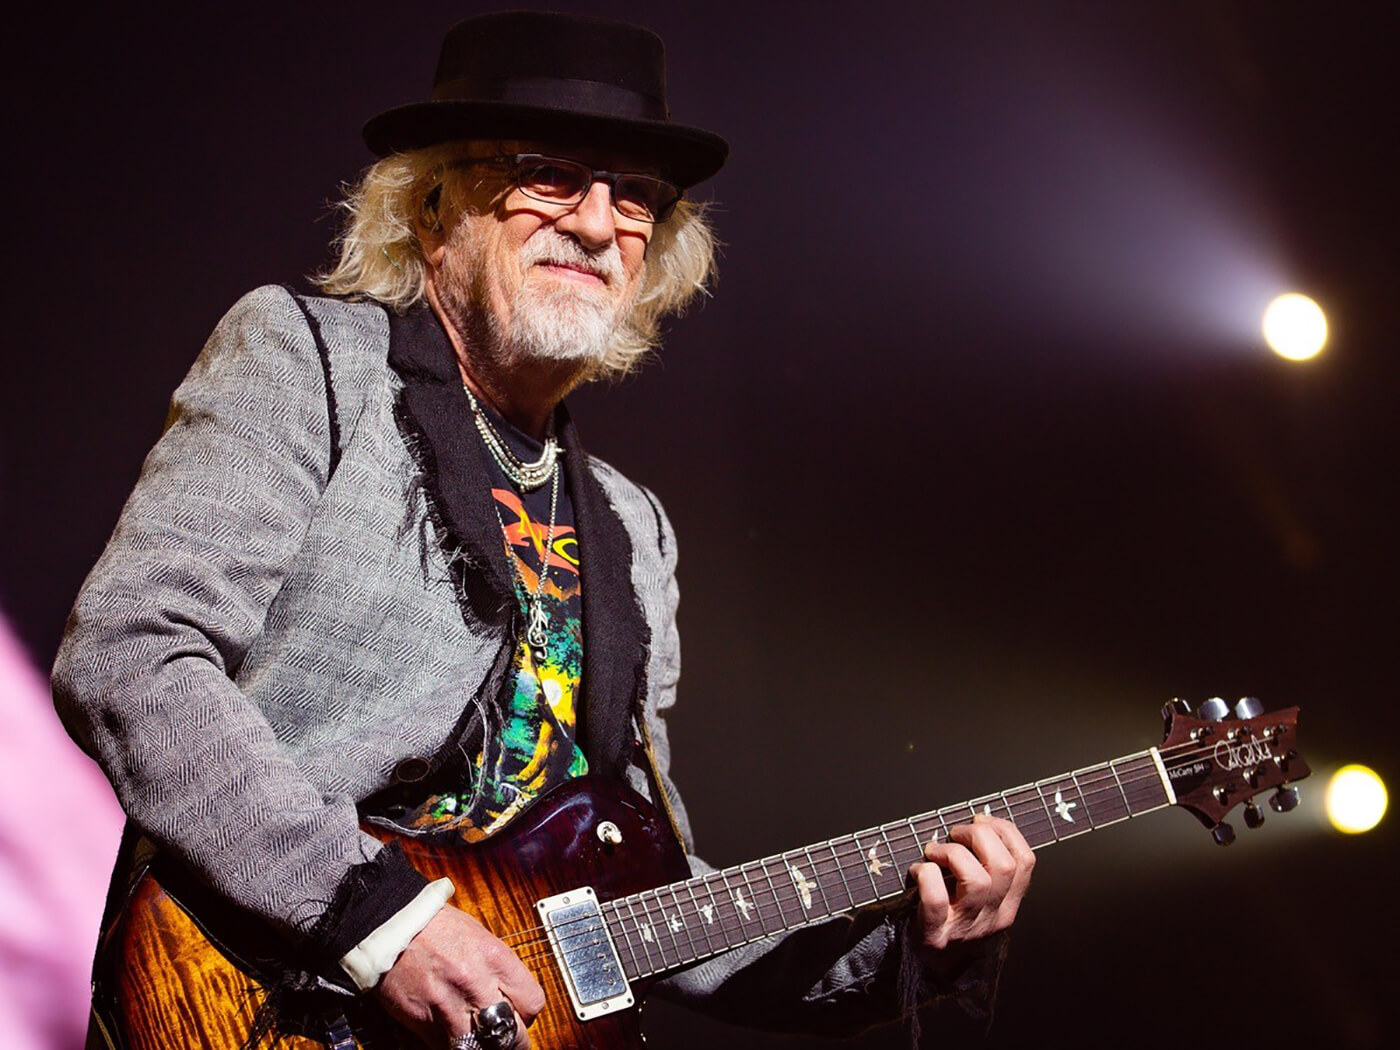 How Old Are The Members of Aerosmith cBrad Whitford